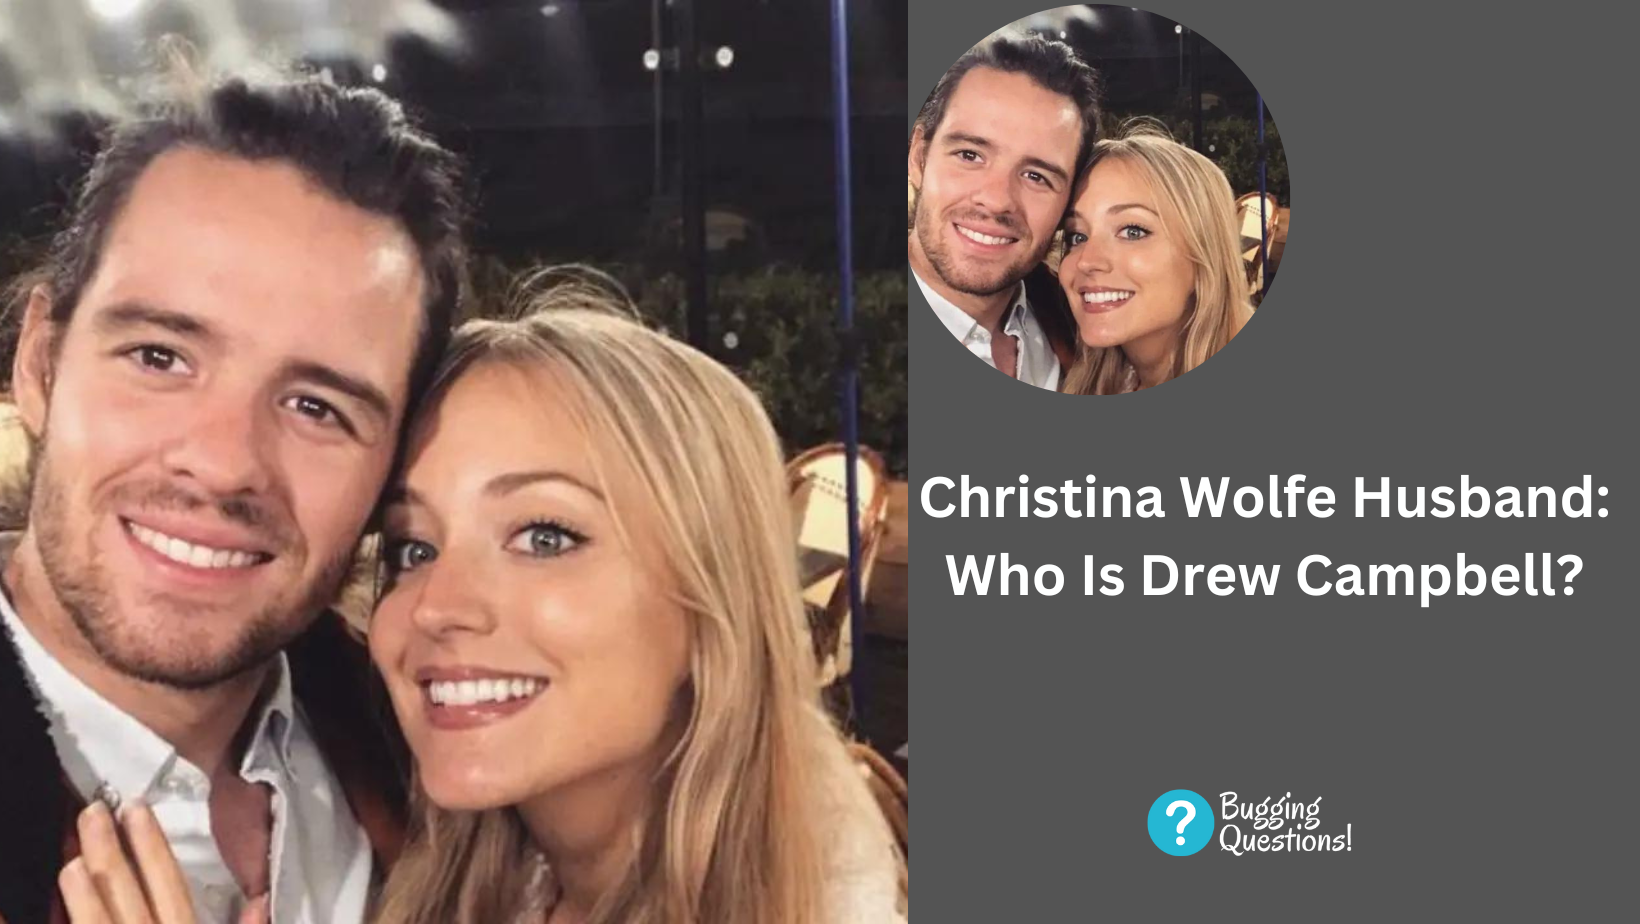 Christina Wolfe Husband: Who Is Drew Campbell?